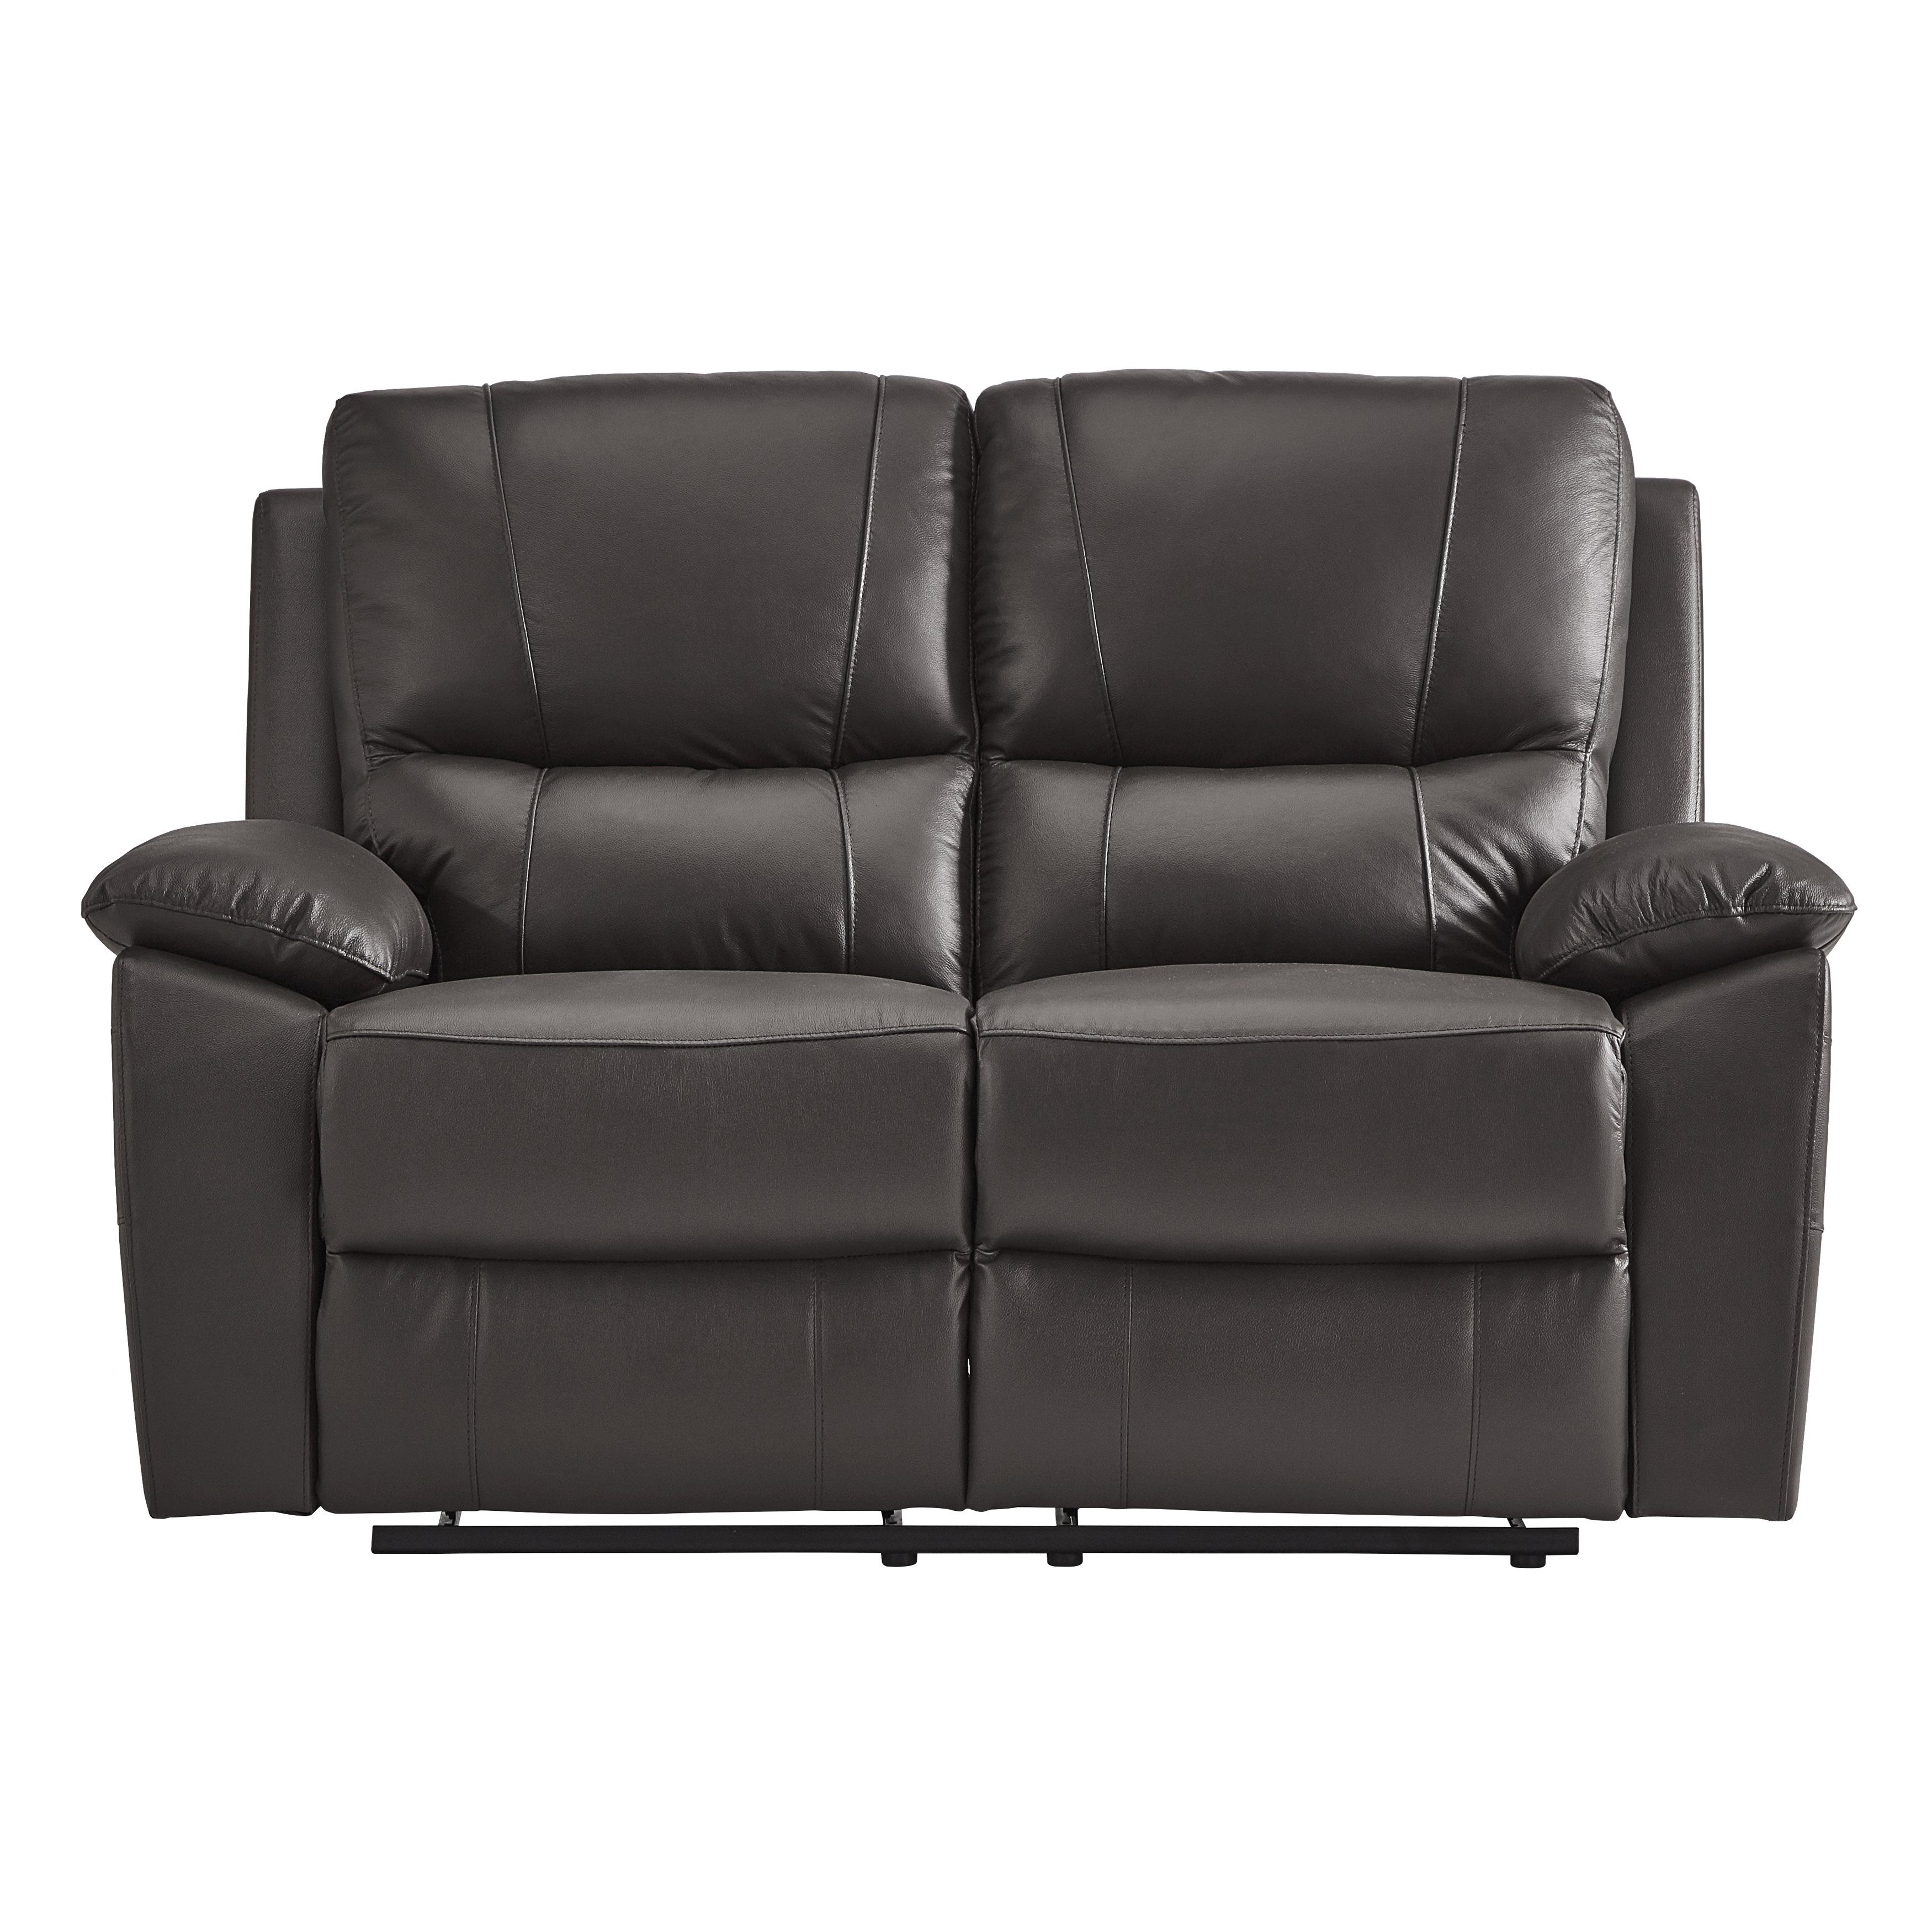 Contemporary Reclining Loveseat Dawson Reclining Loveseat 9368BRW-2-L 9368BRW-2-L in Brown Faux Leather